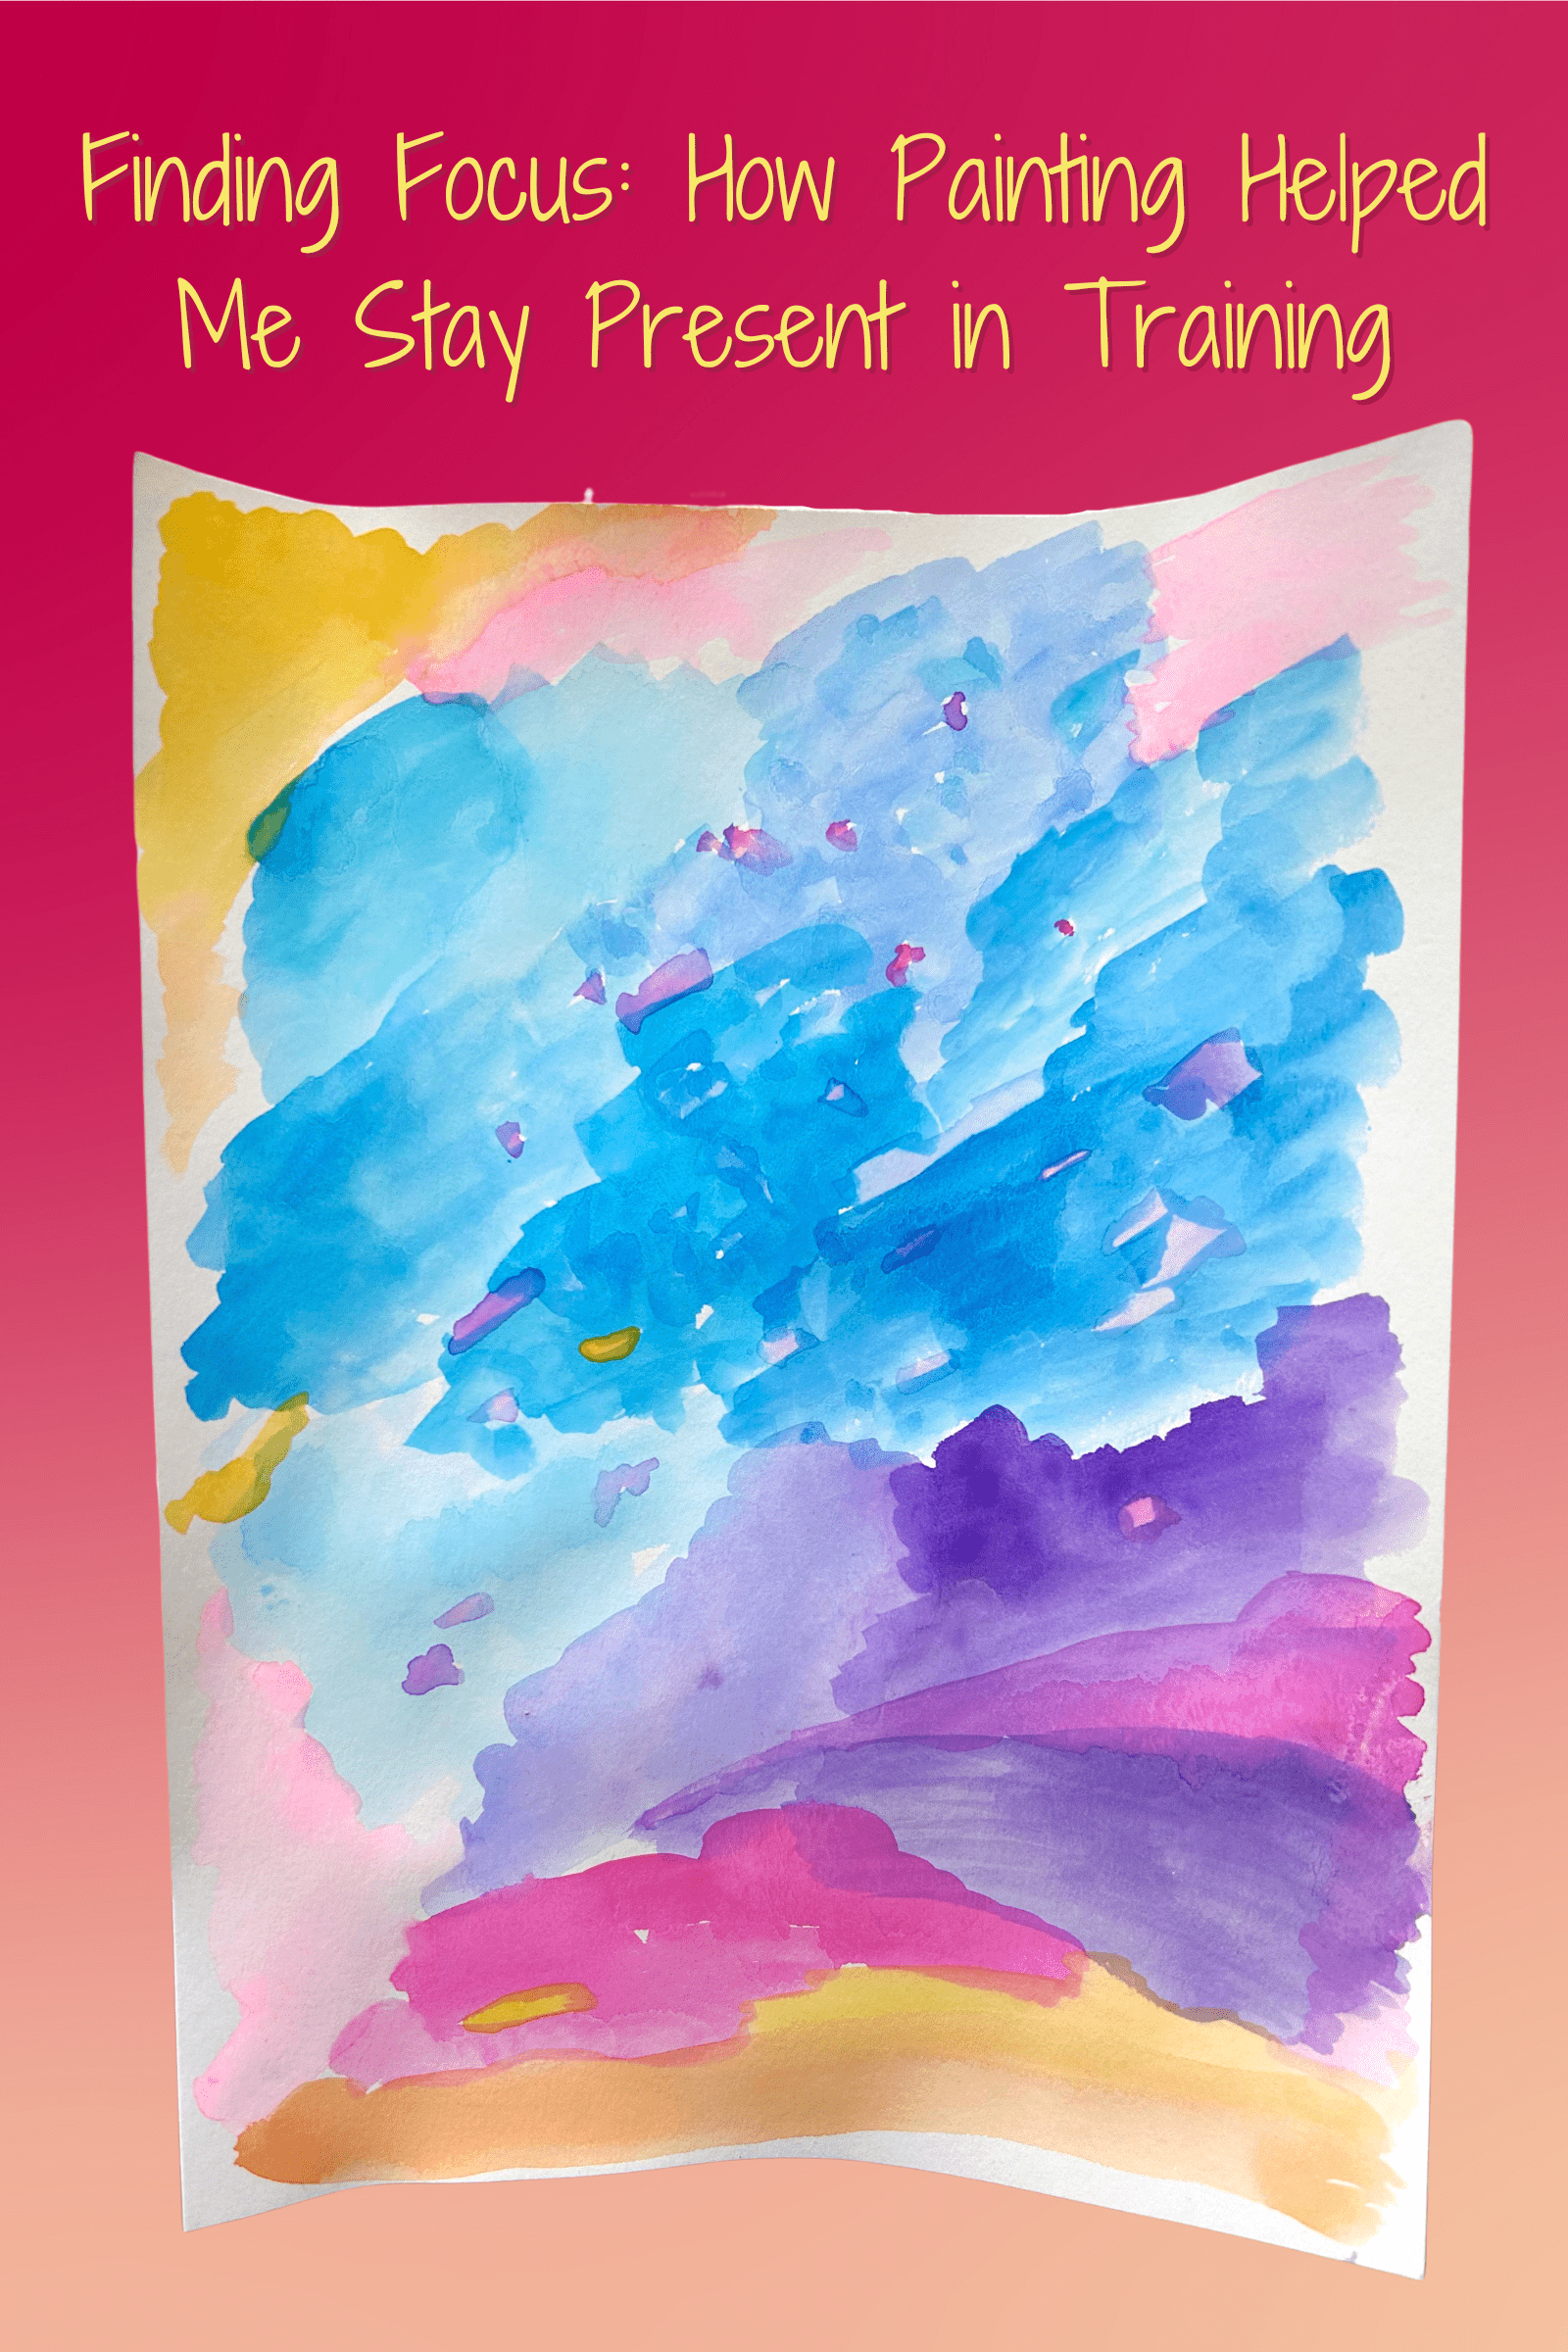 "Finding Focus: How Painting Helped Me Stay Present in Training" and underneath that, there is a cutout image of a piece of watercolor paper with various abstract designs. The colors included are a variety of blues, purples, pinks, and orange/yellows.